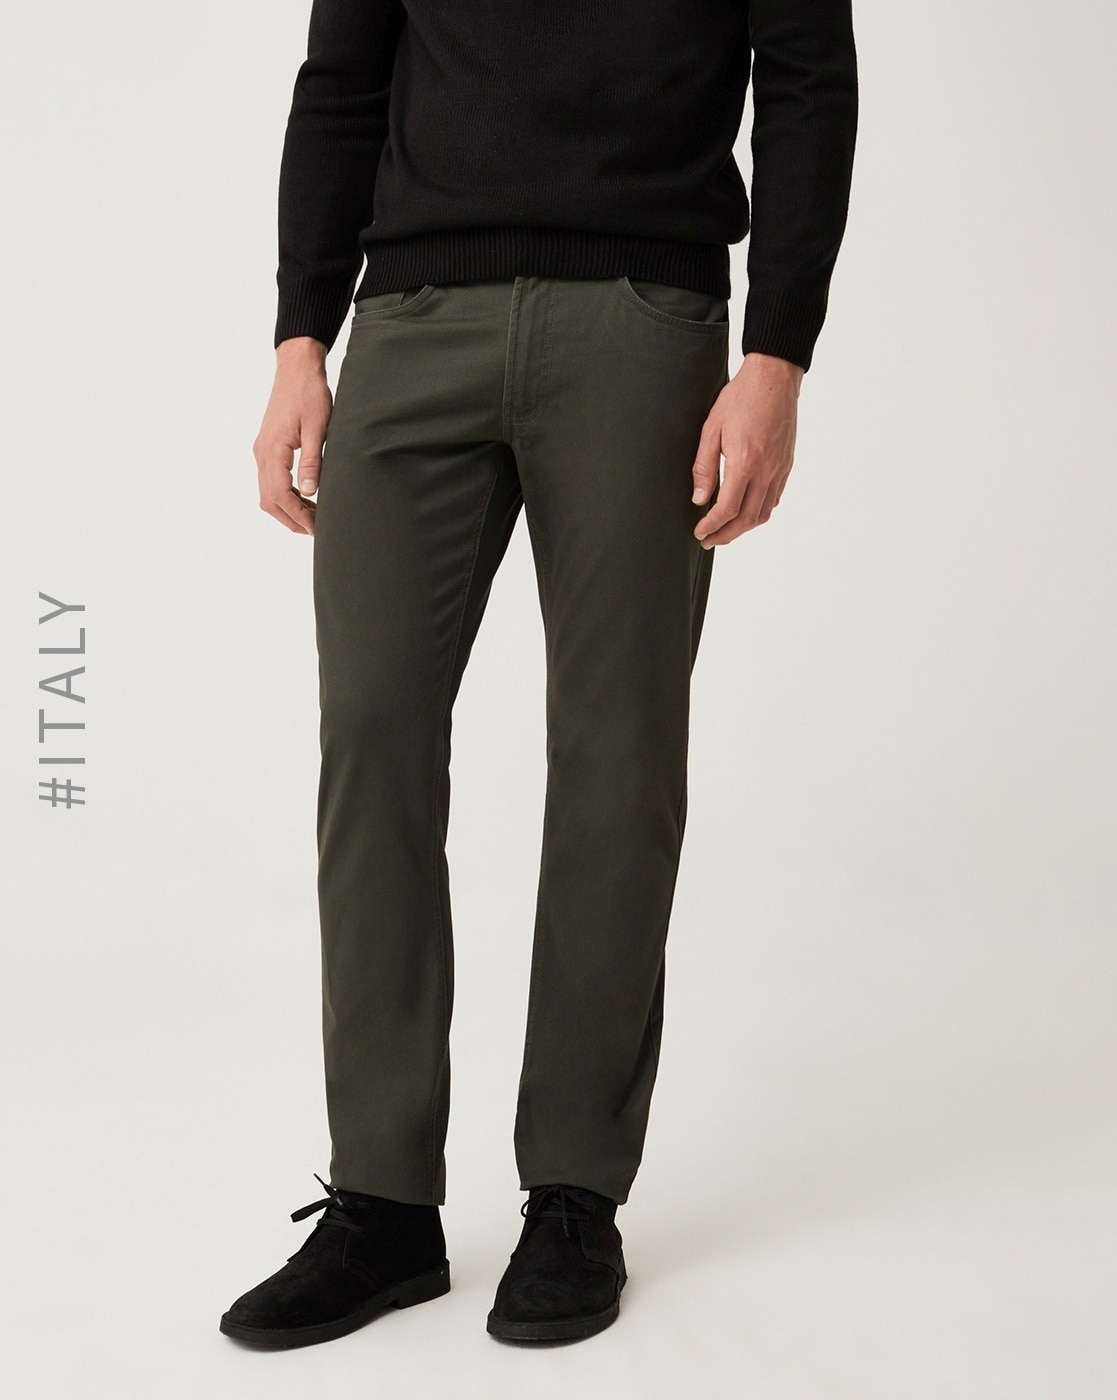 Buy GANT Olive Green Soho Fit Chino Trousers  Trousers for Men 1312068   Myntra